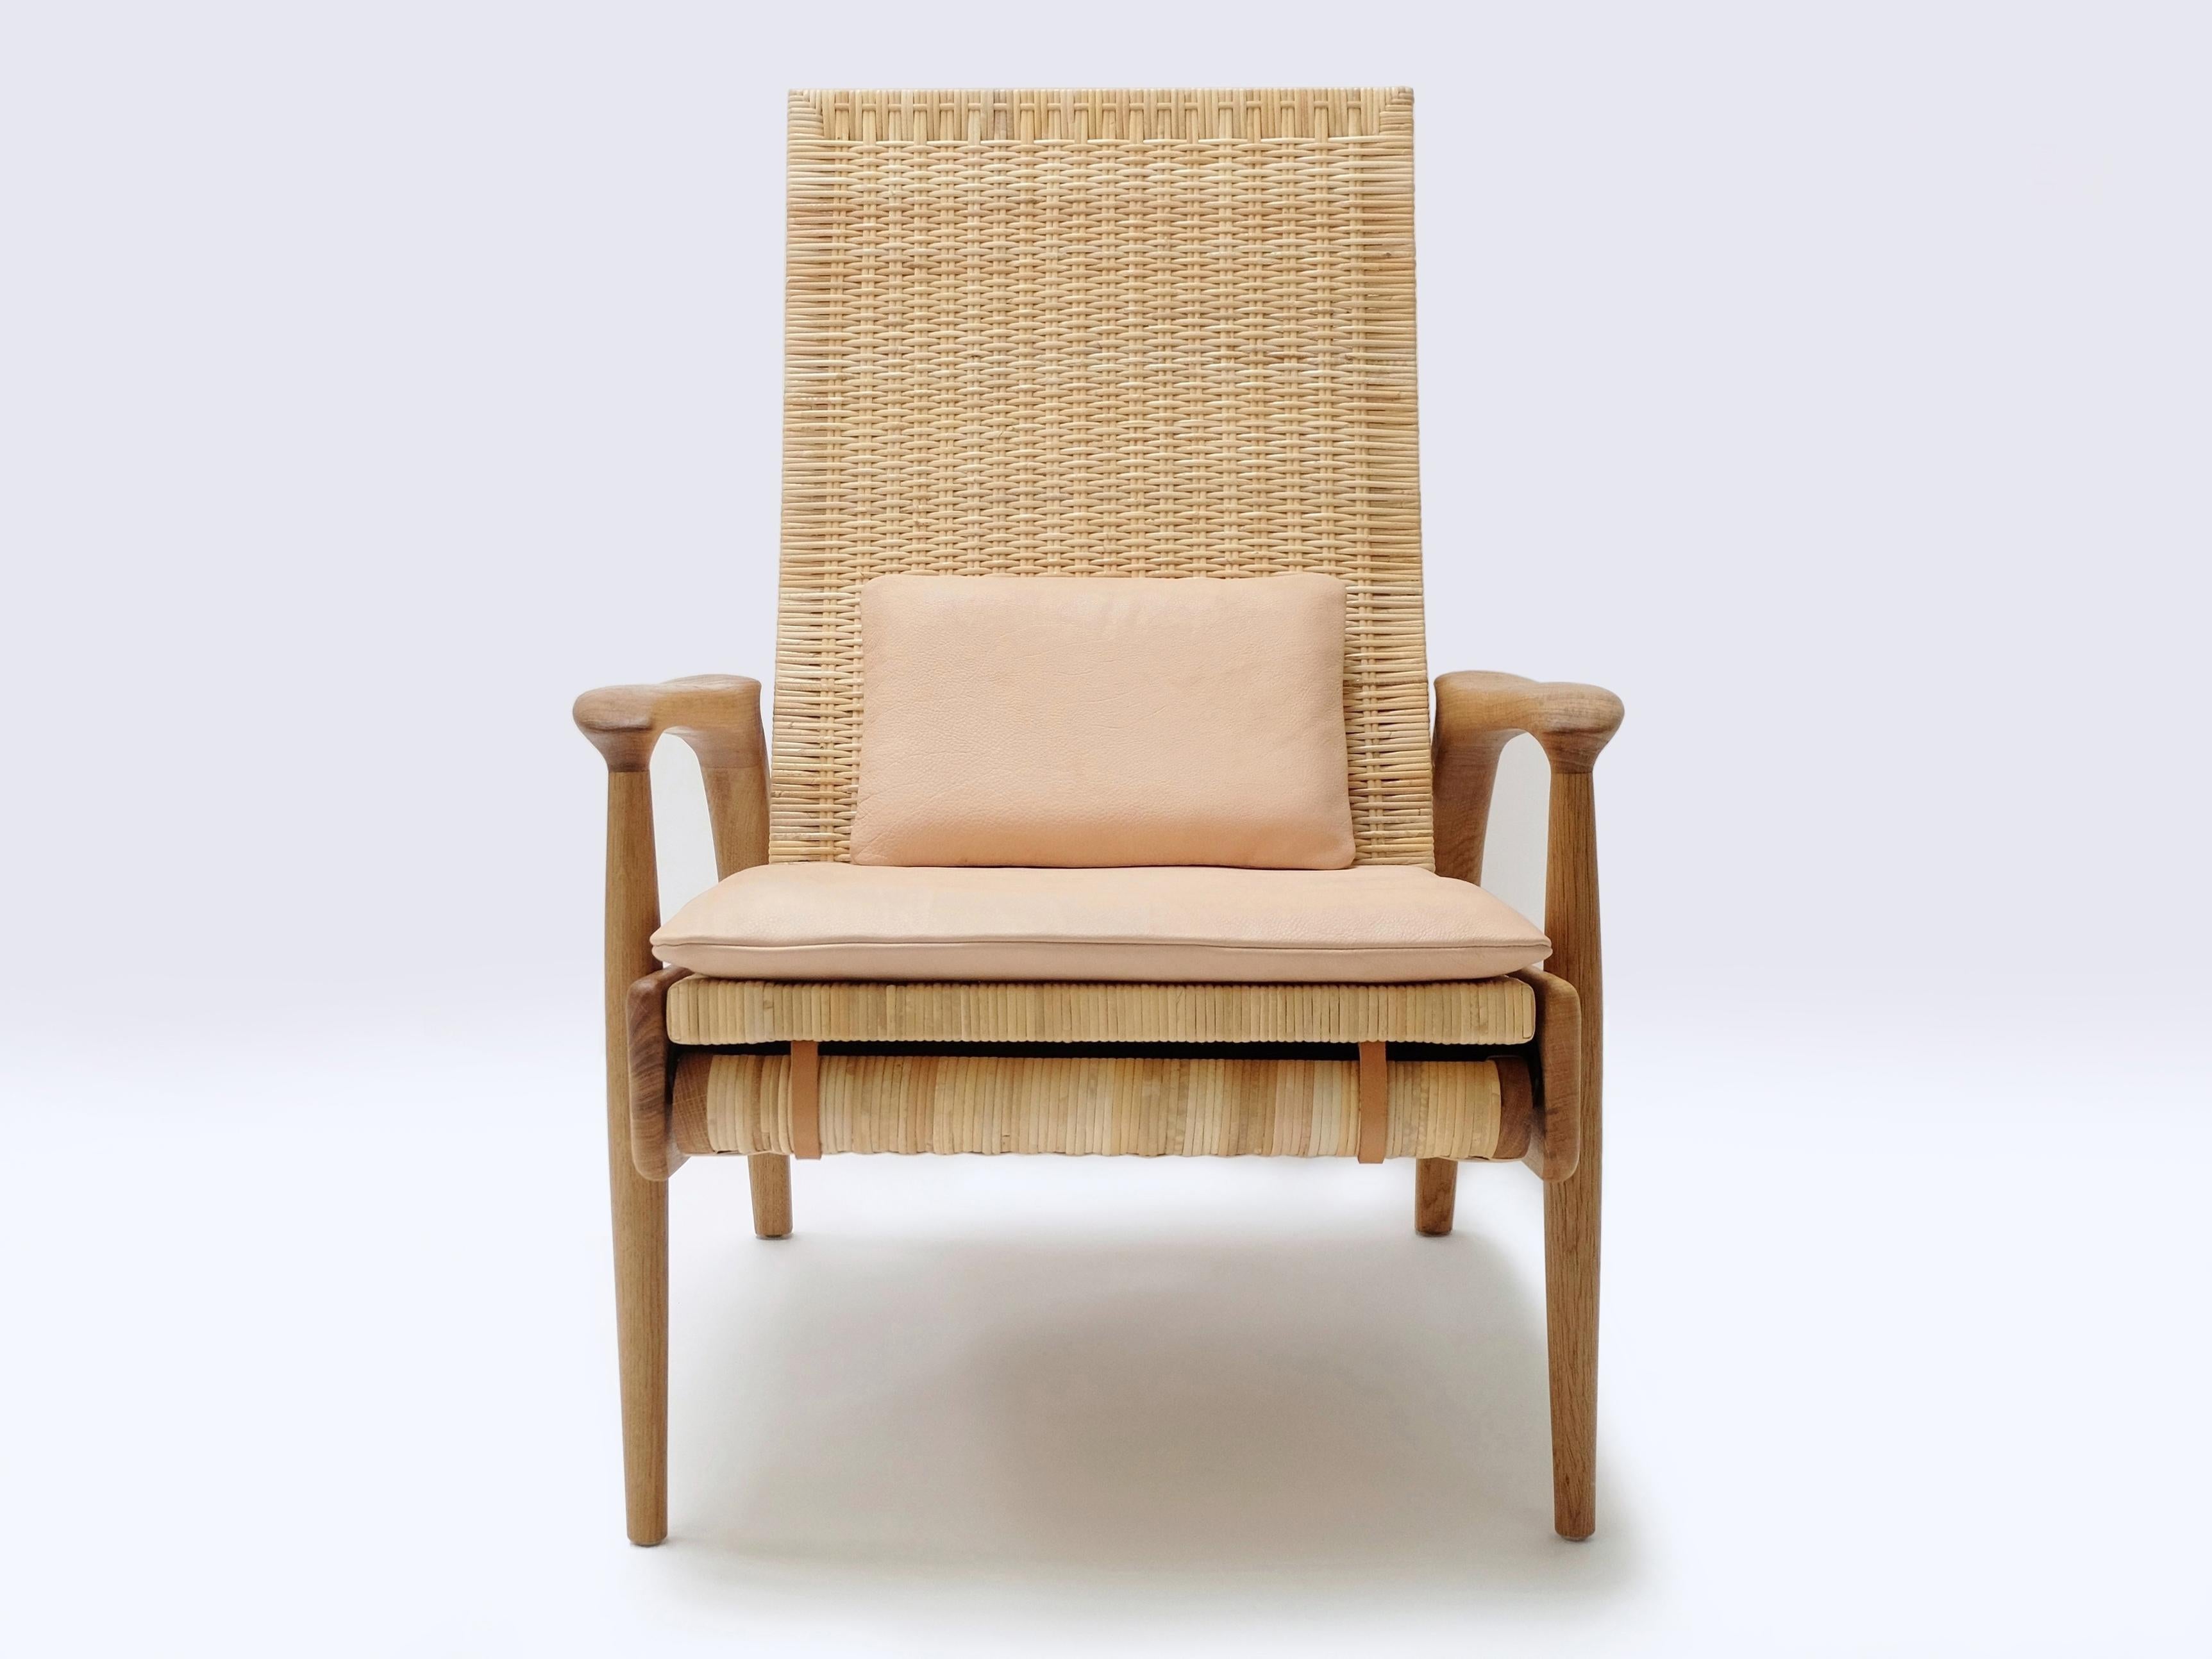 Hand-Woven Pair of Reclining Armchairs, Solid Oak, Handwoven Natural Cane, Leather Cushions For Sale